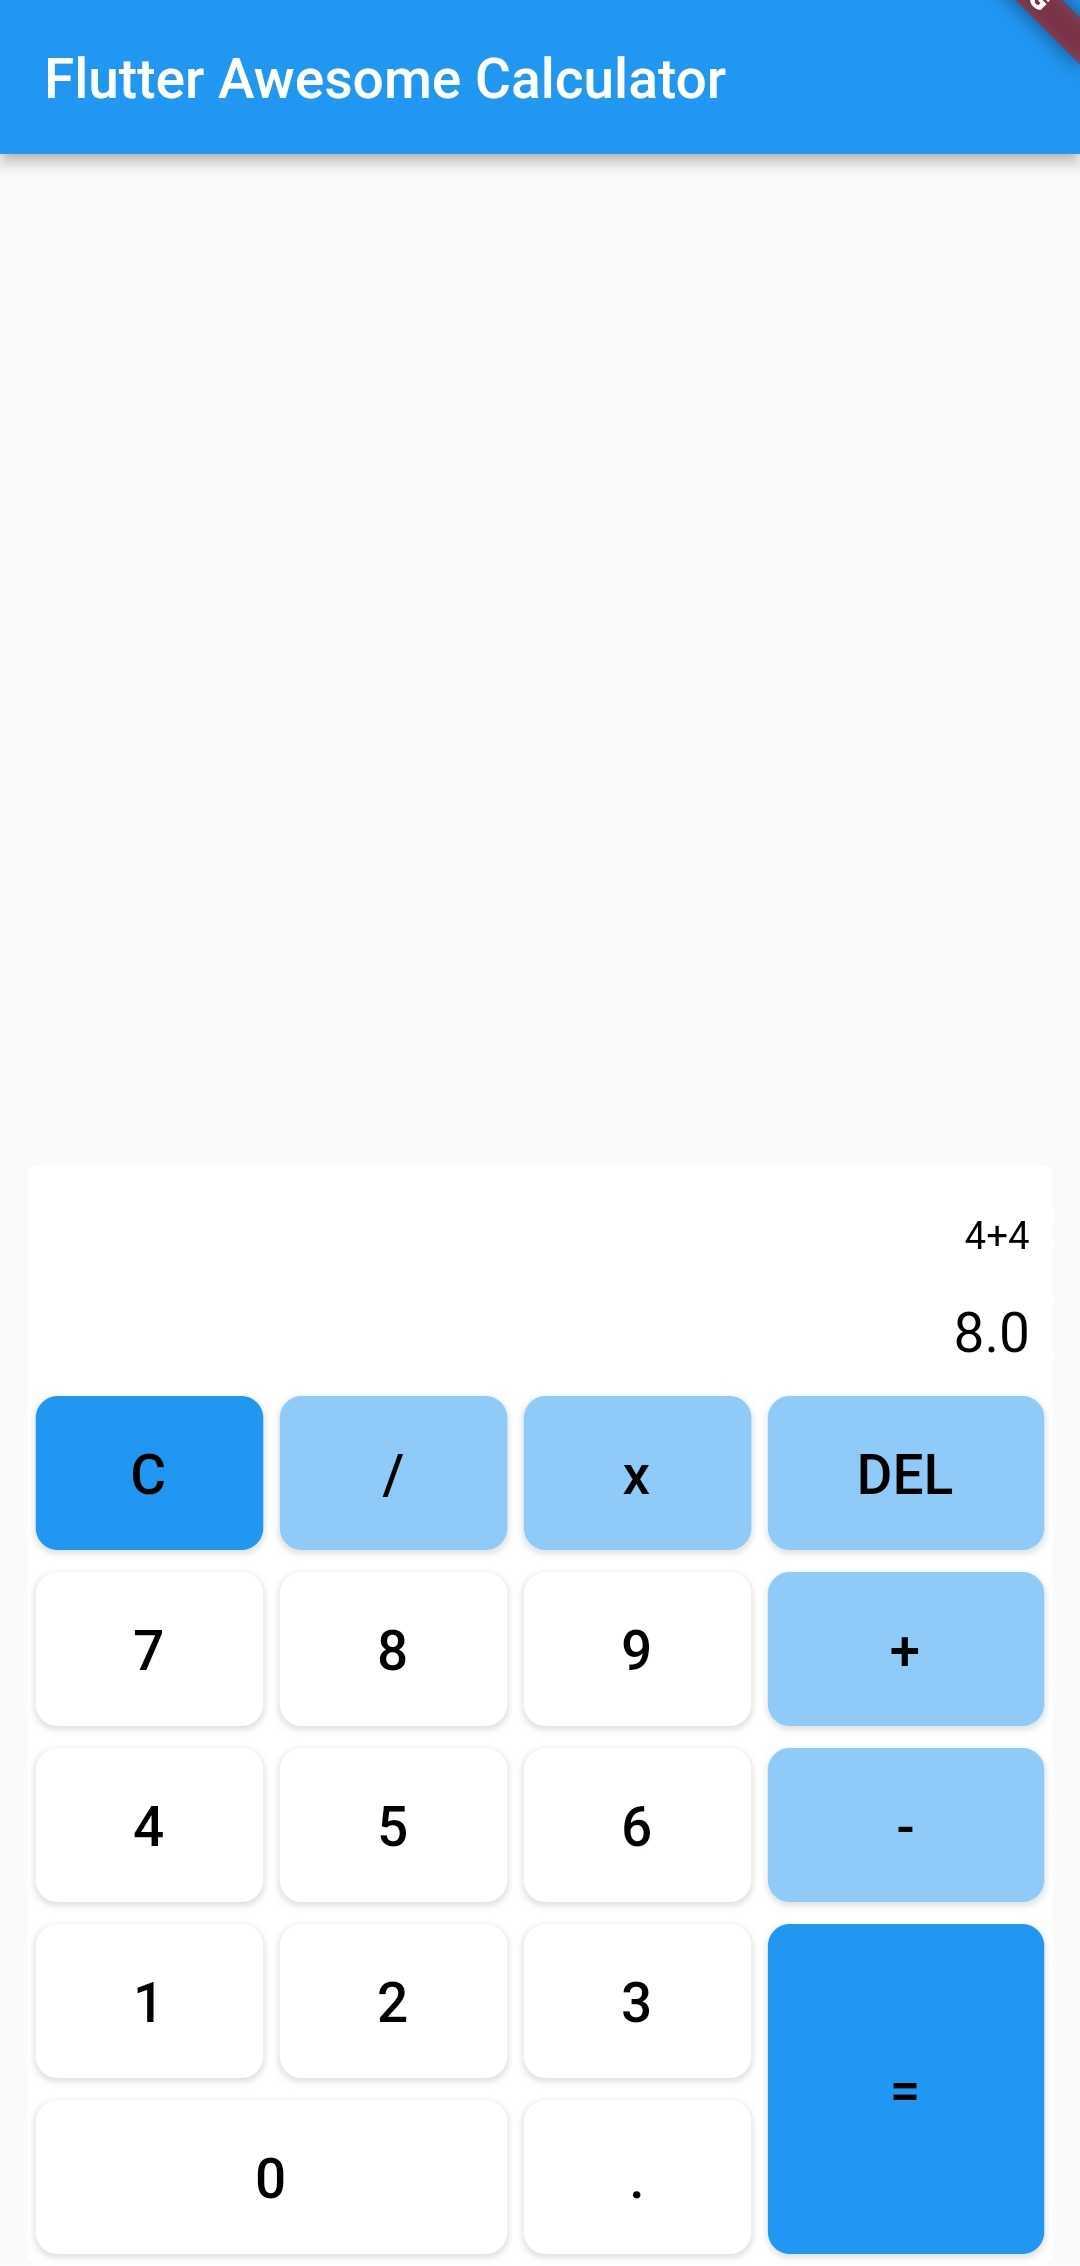 flutter_awesome_calculator example